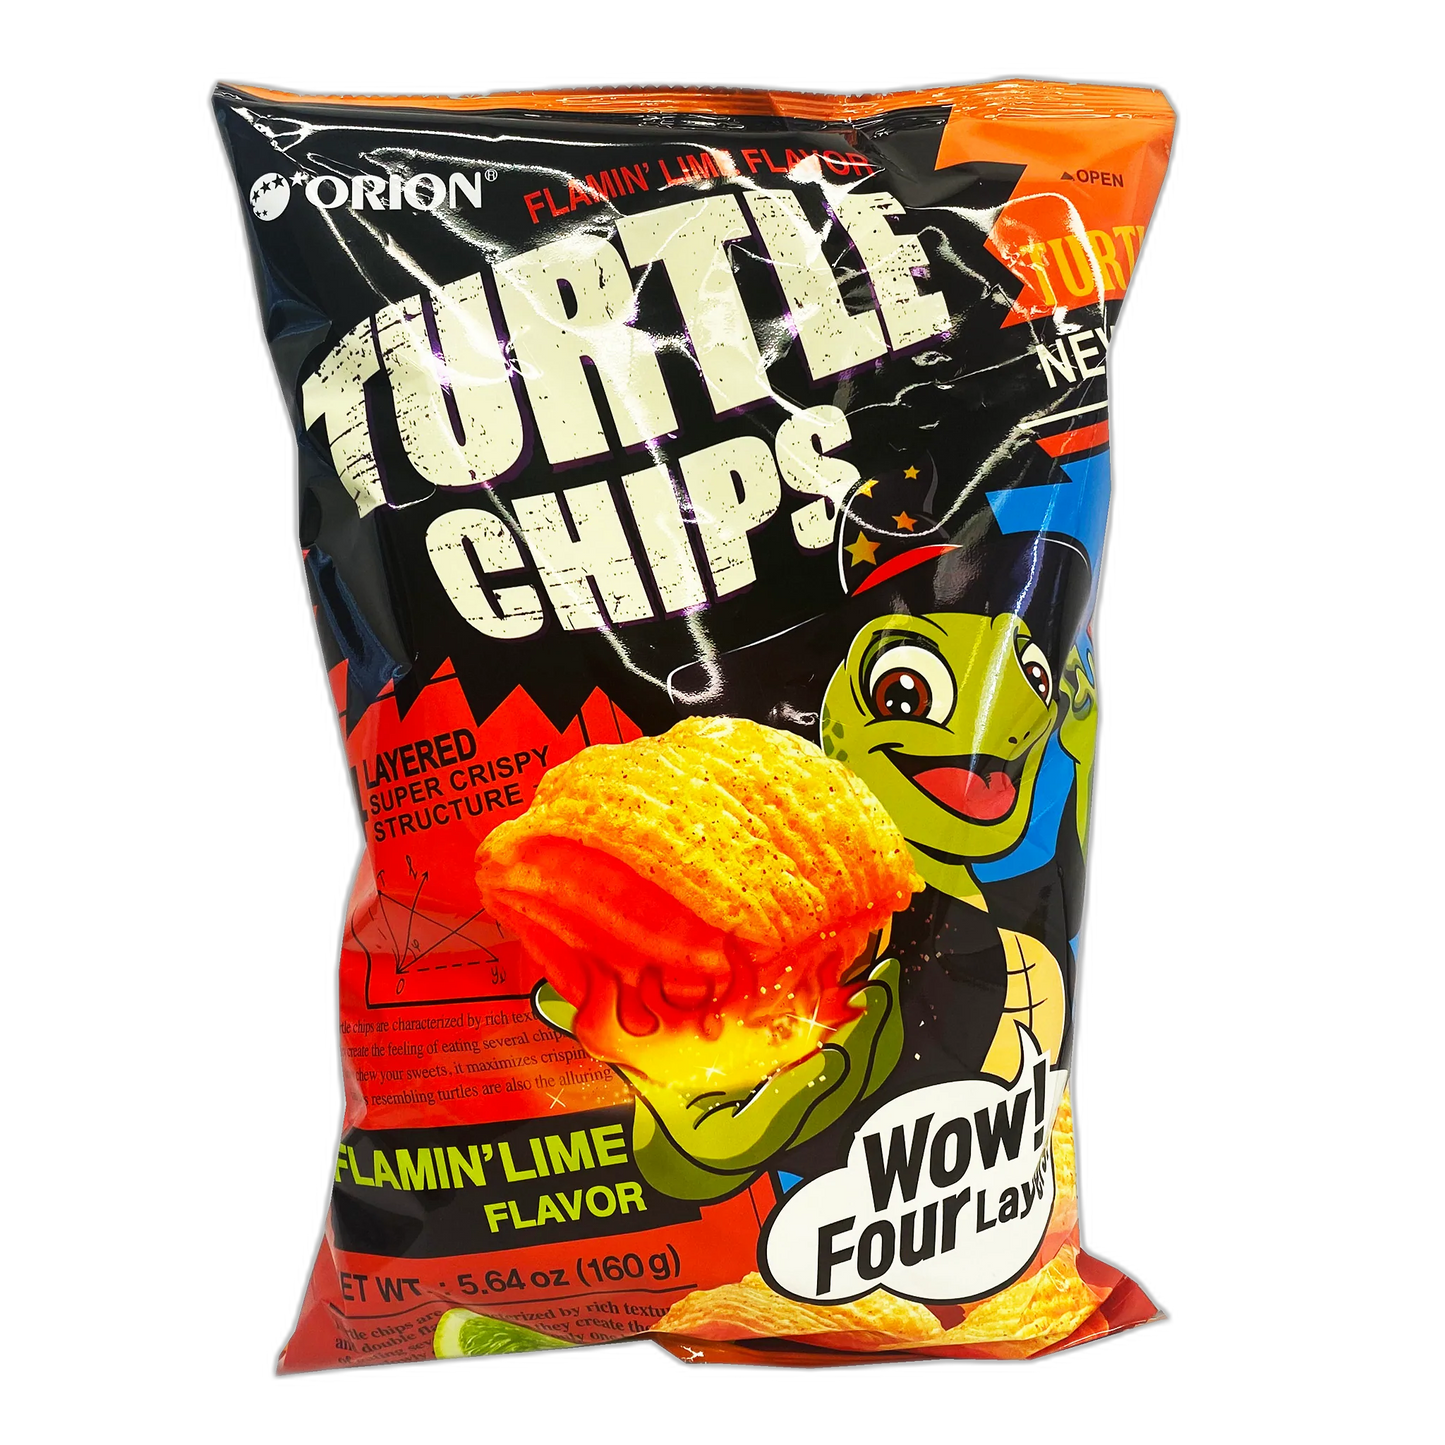 Orion - Turtle Chip - Flamin' Lime (5.64)